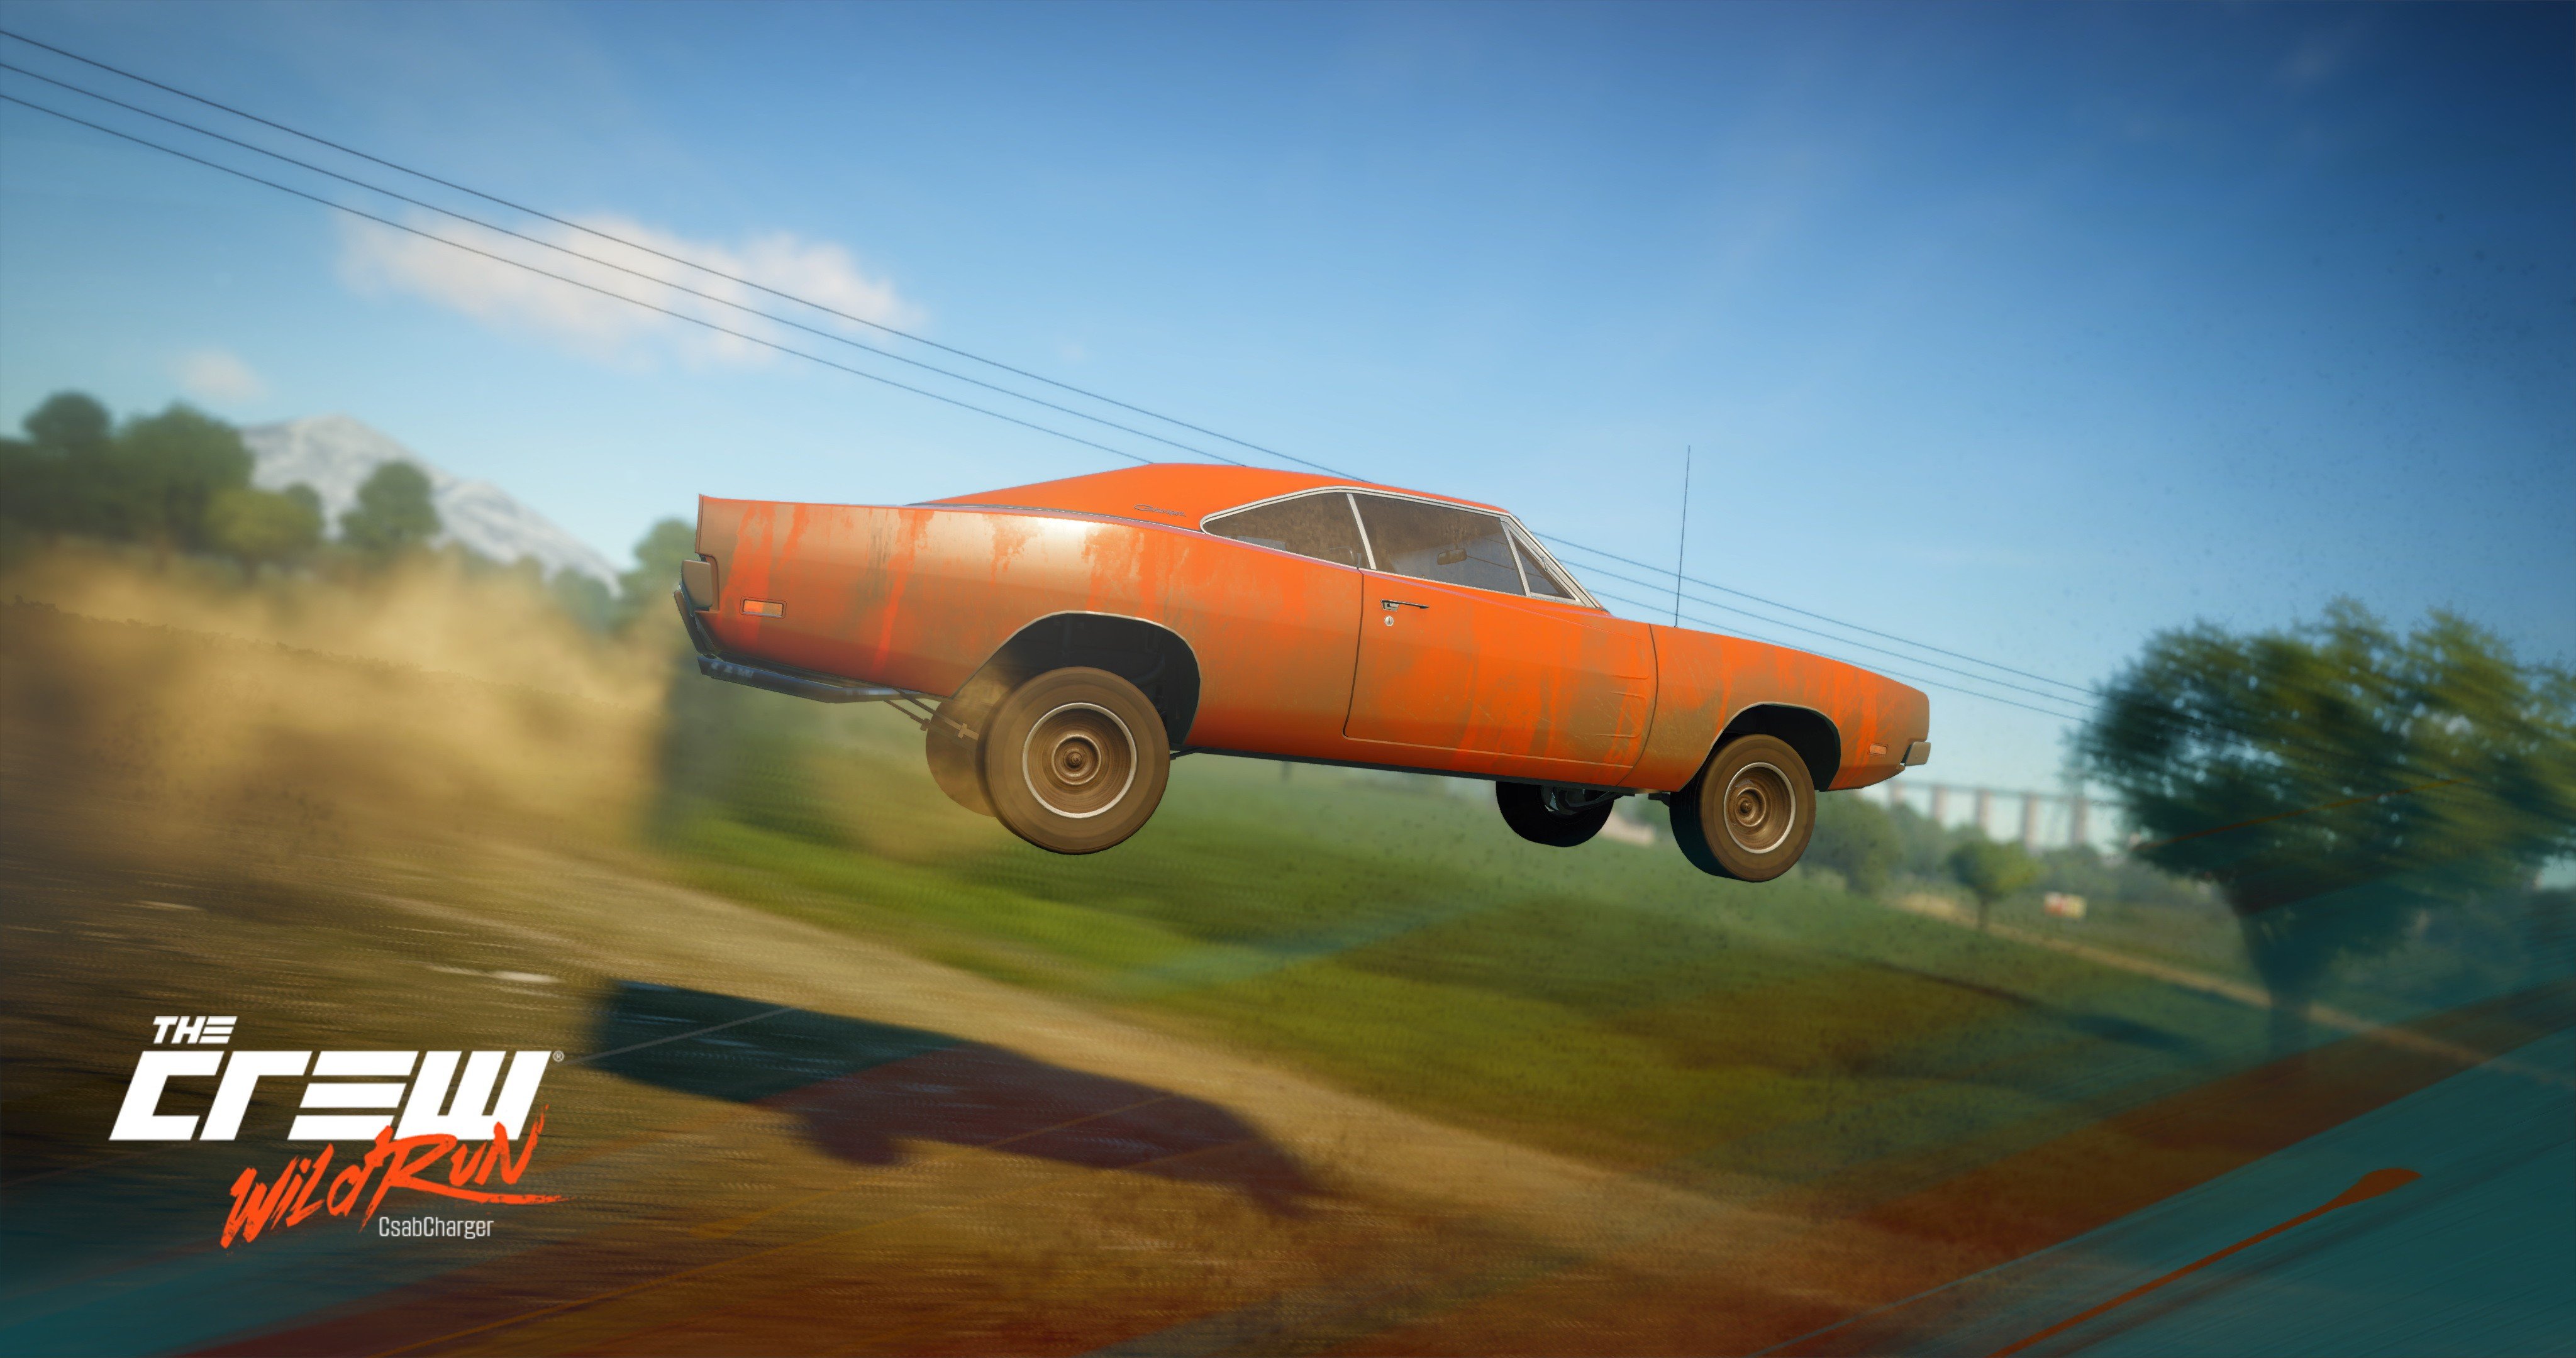 race cars, The Crew Wild Run, The Crew, Dodge Charger R T 1968 Wallpaper